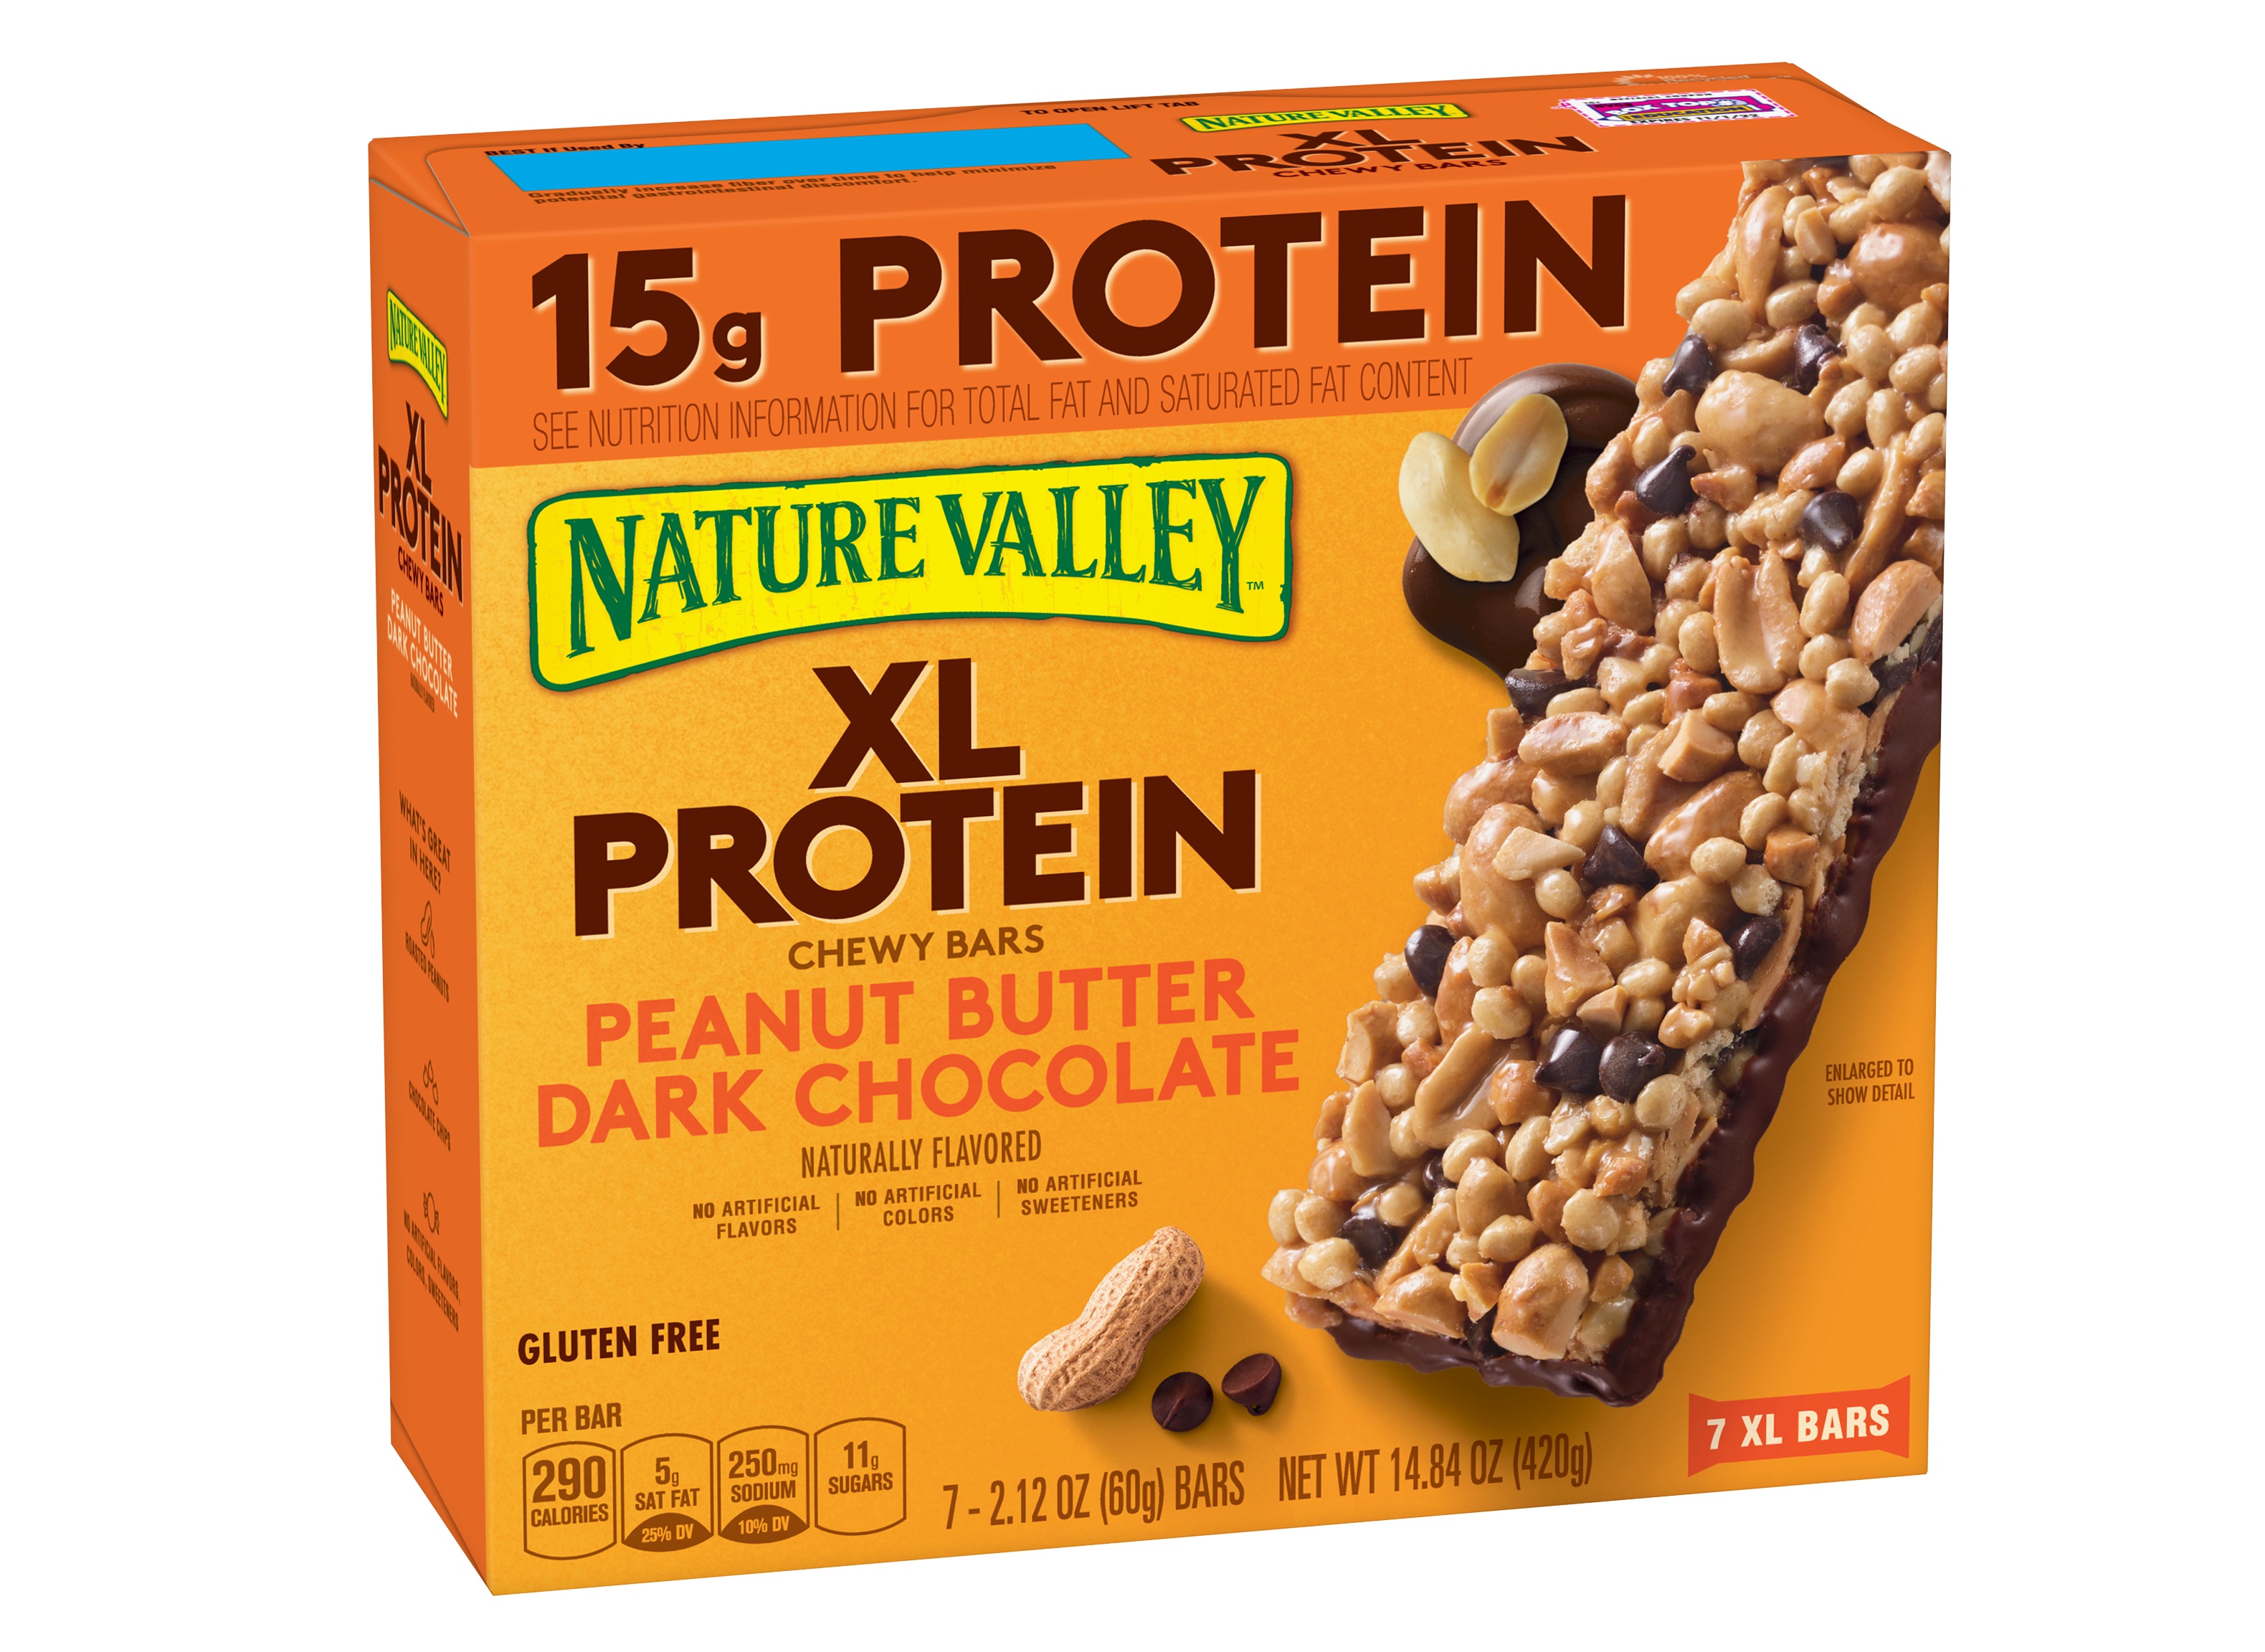 Nature Valley XL Protein Chewy Bars Peanut Butter Dark Chocolate